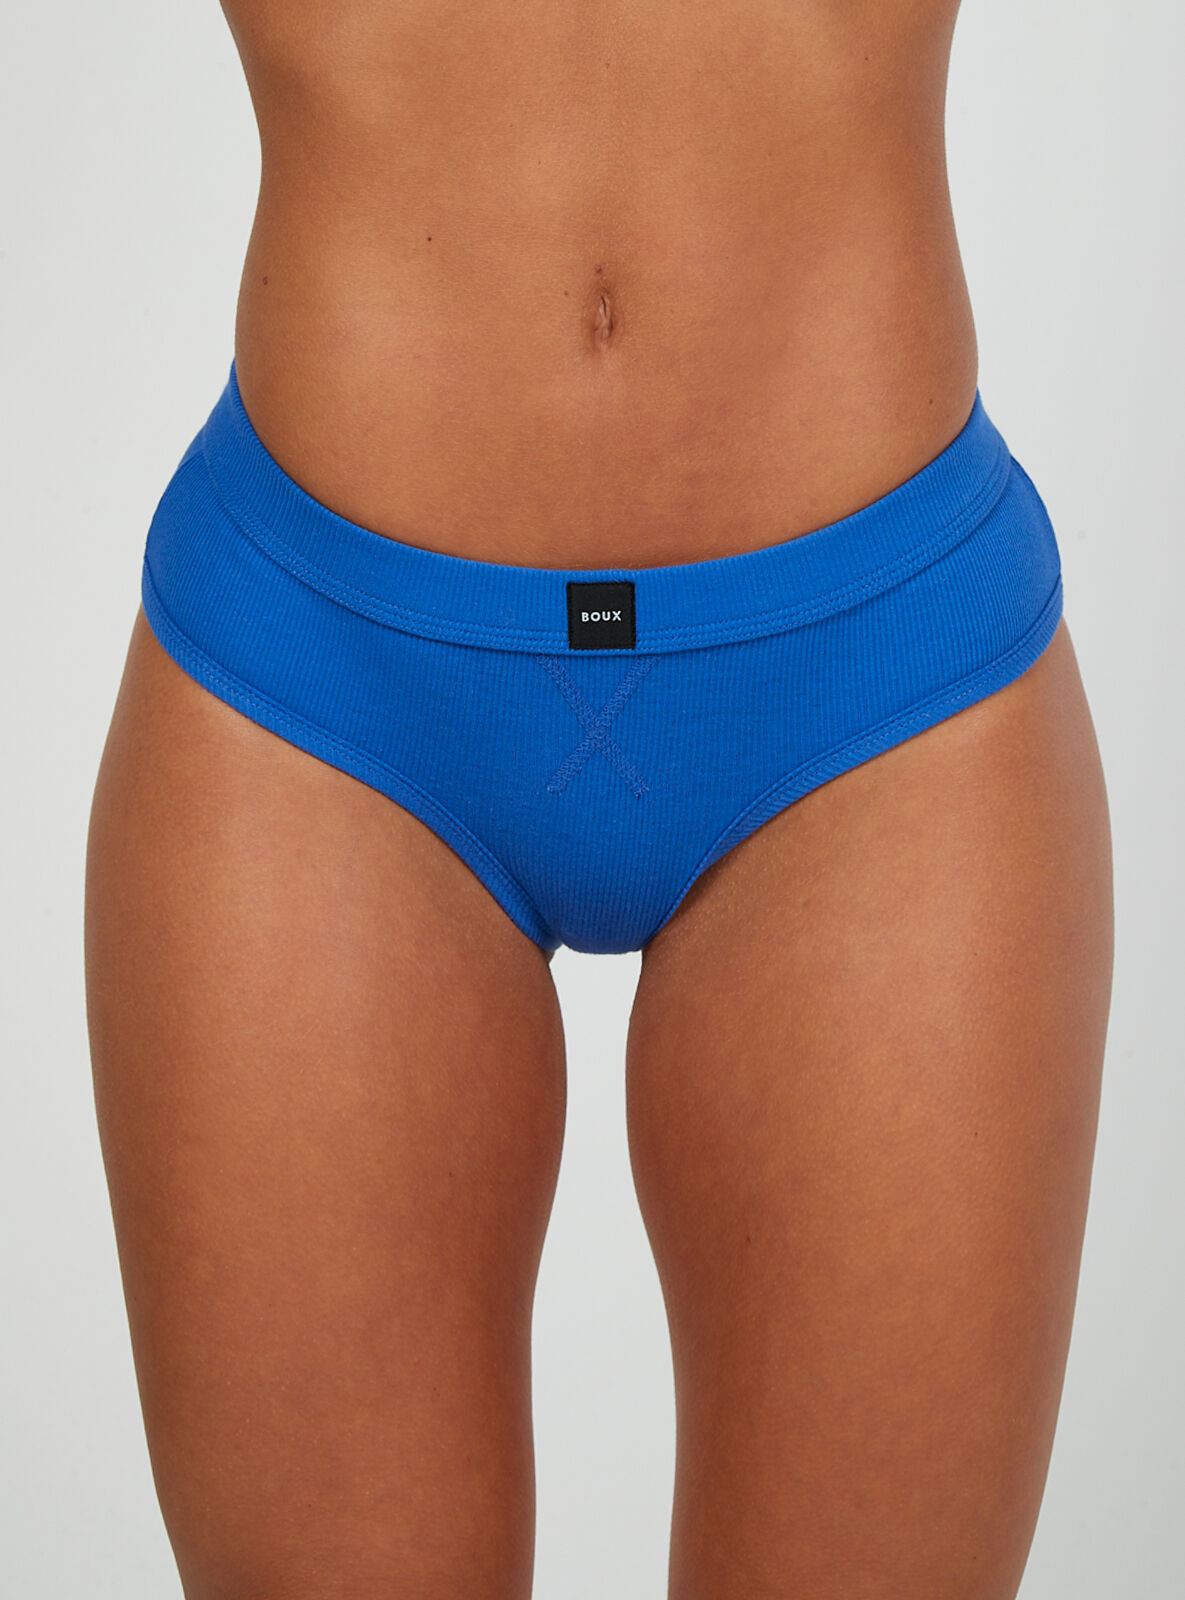 Boux Avenue Nell ribbed cheeky shorts - Cobalt Blue - 18